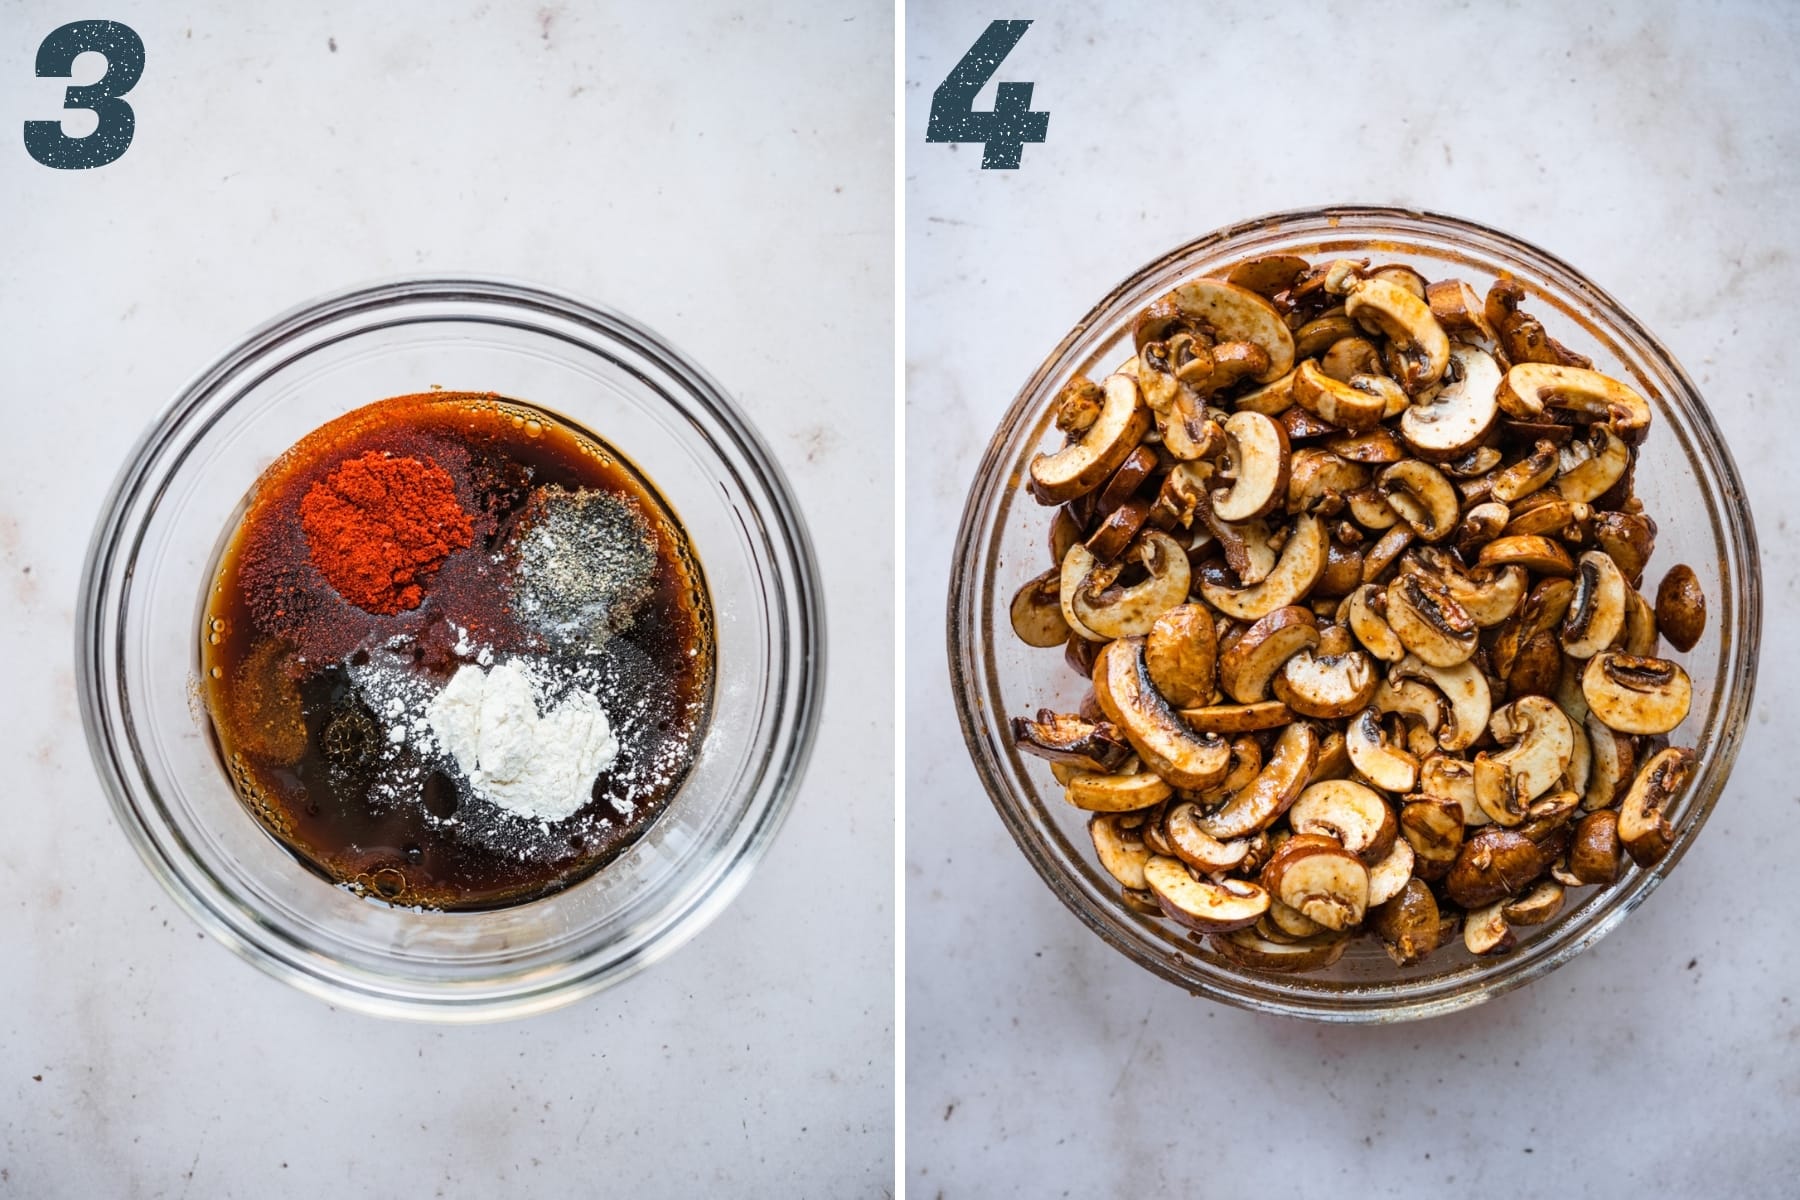 on the left: ingredients for soy sauce marinade for mushroom bacon. On the right: mushrooms tossed in marinade in bowl. 